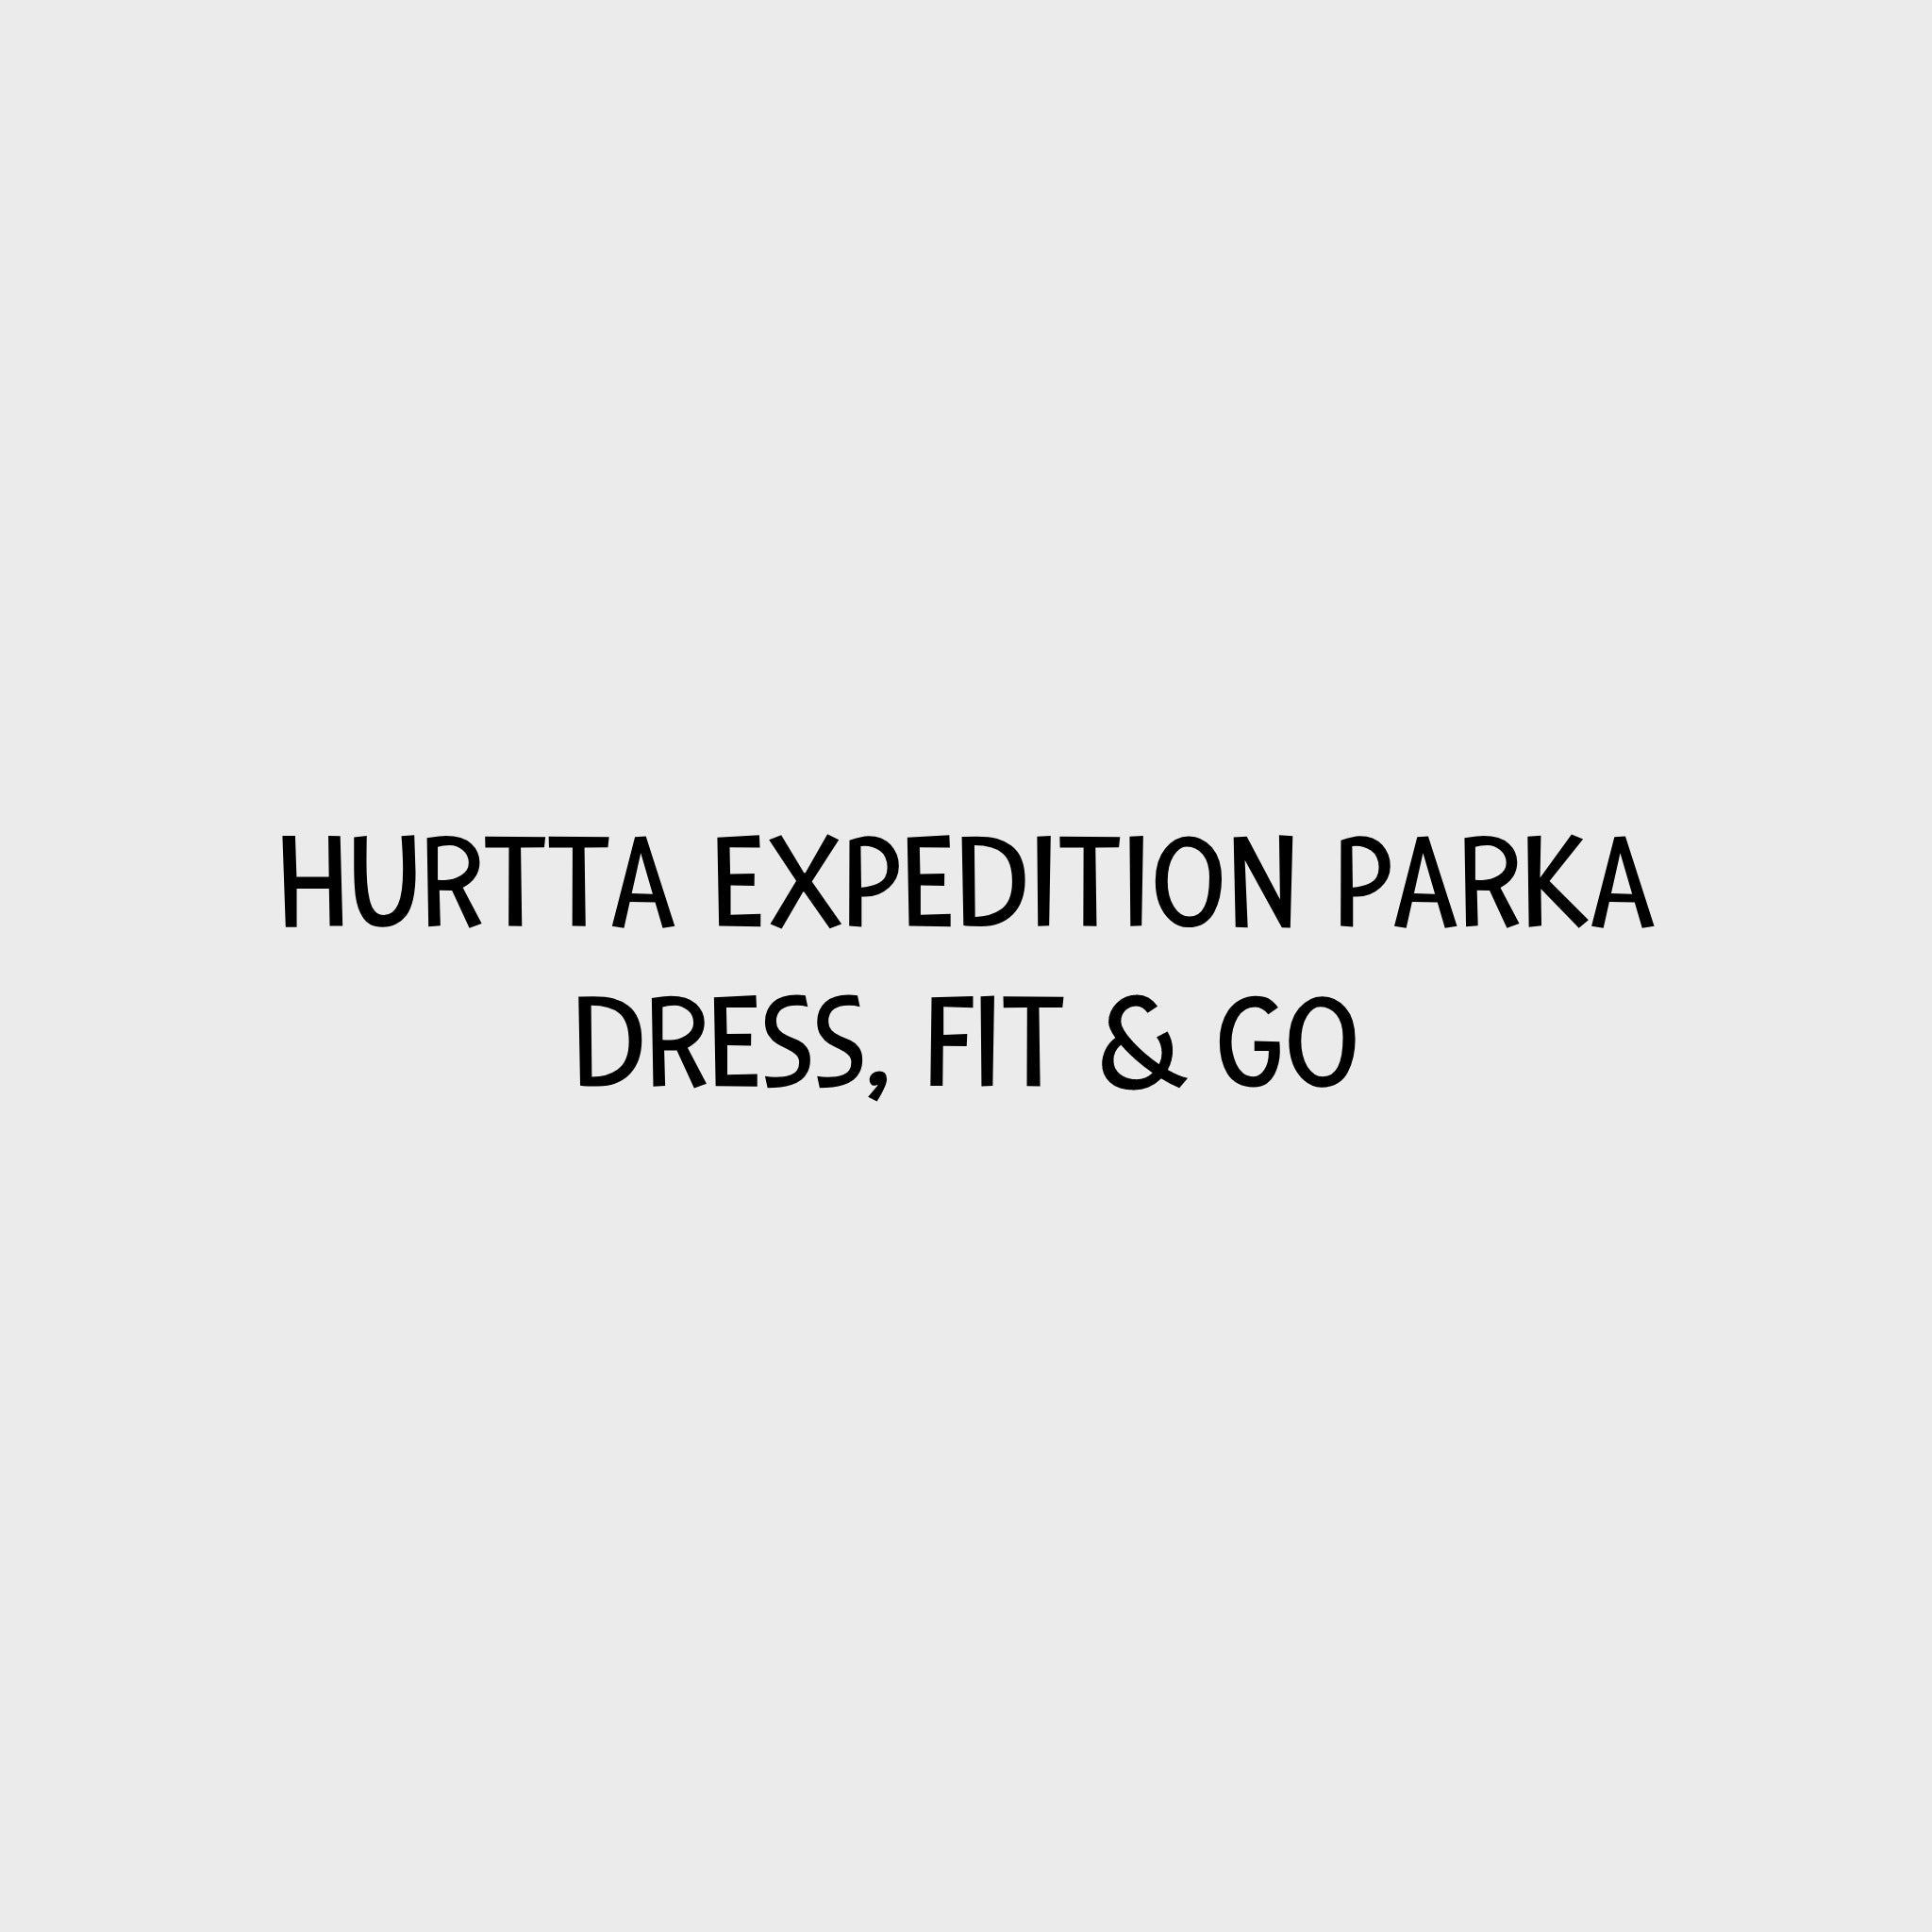 Video - Hurtta Expedition Parka Dress, Fit & Go